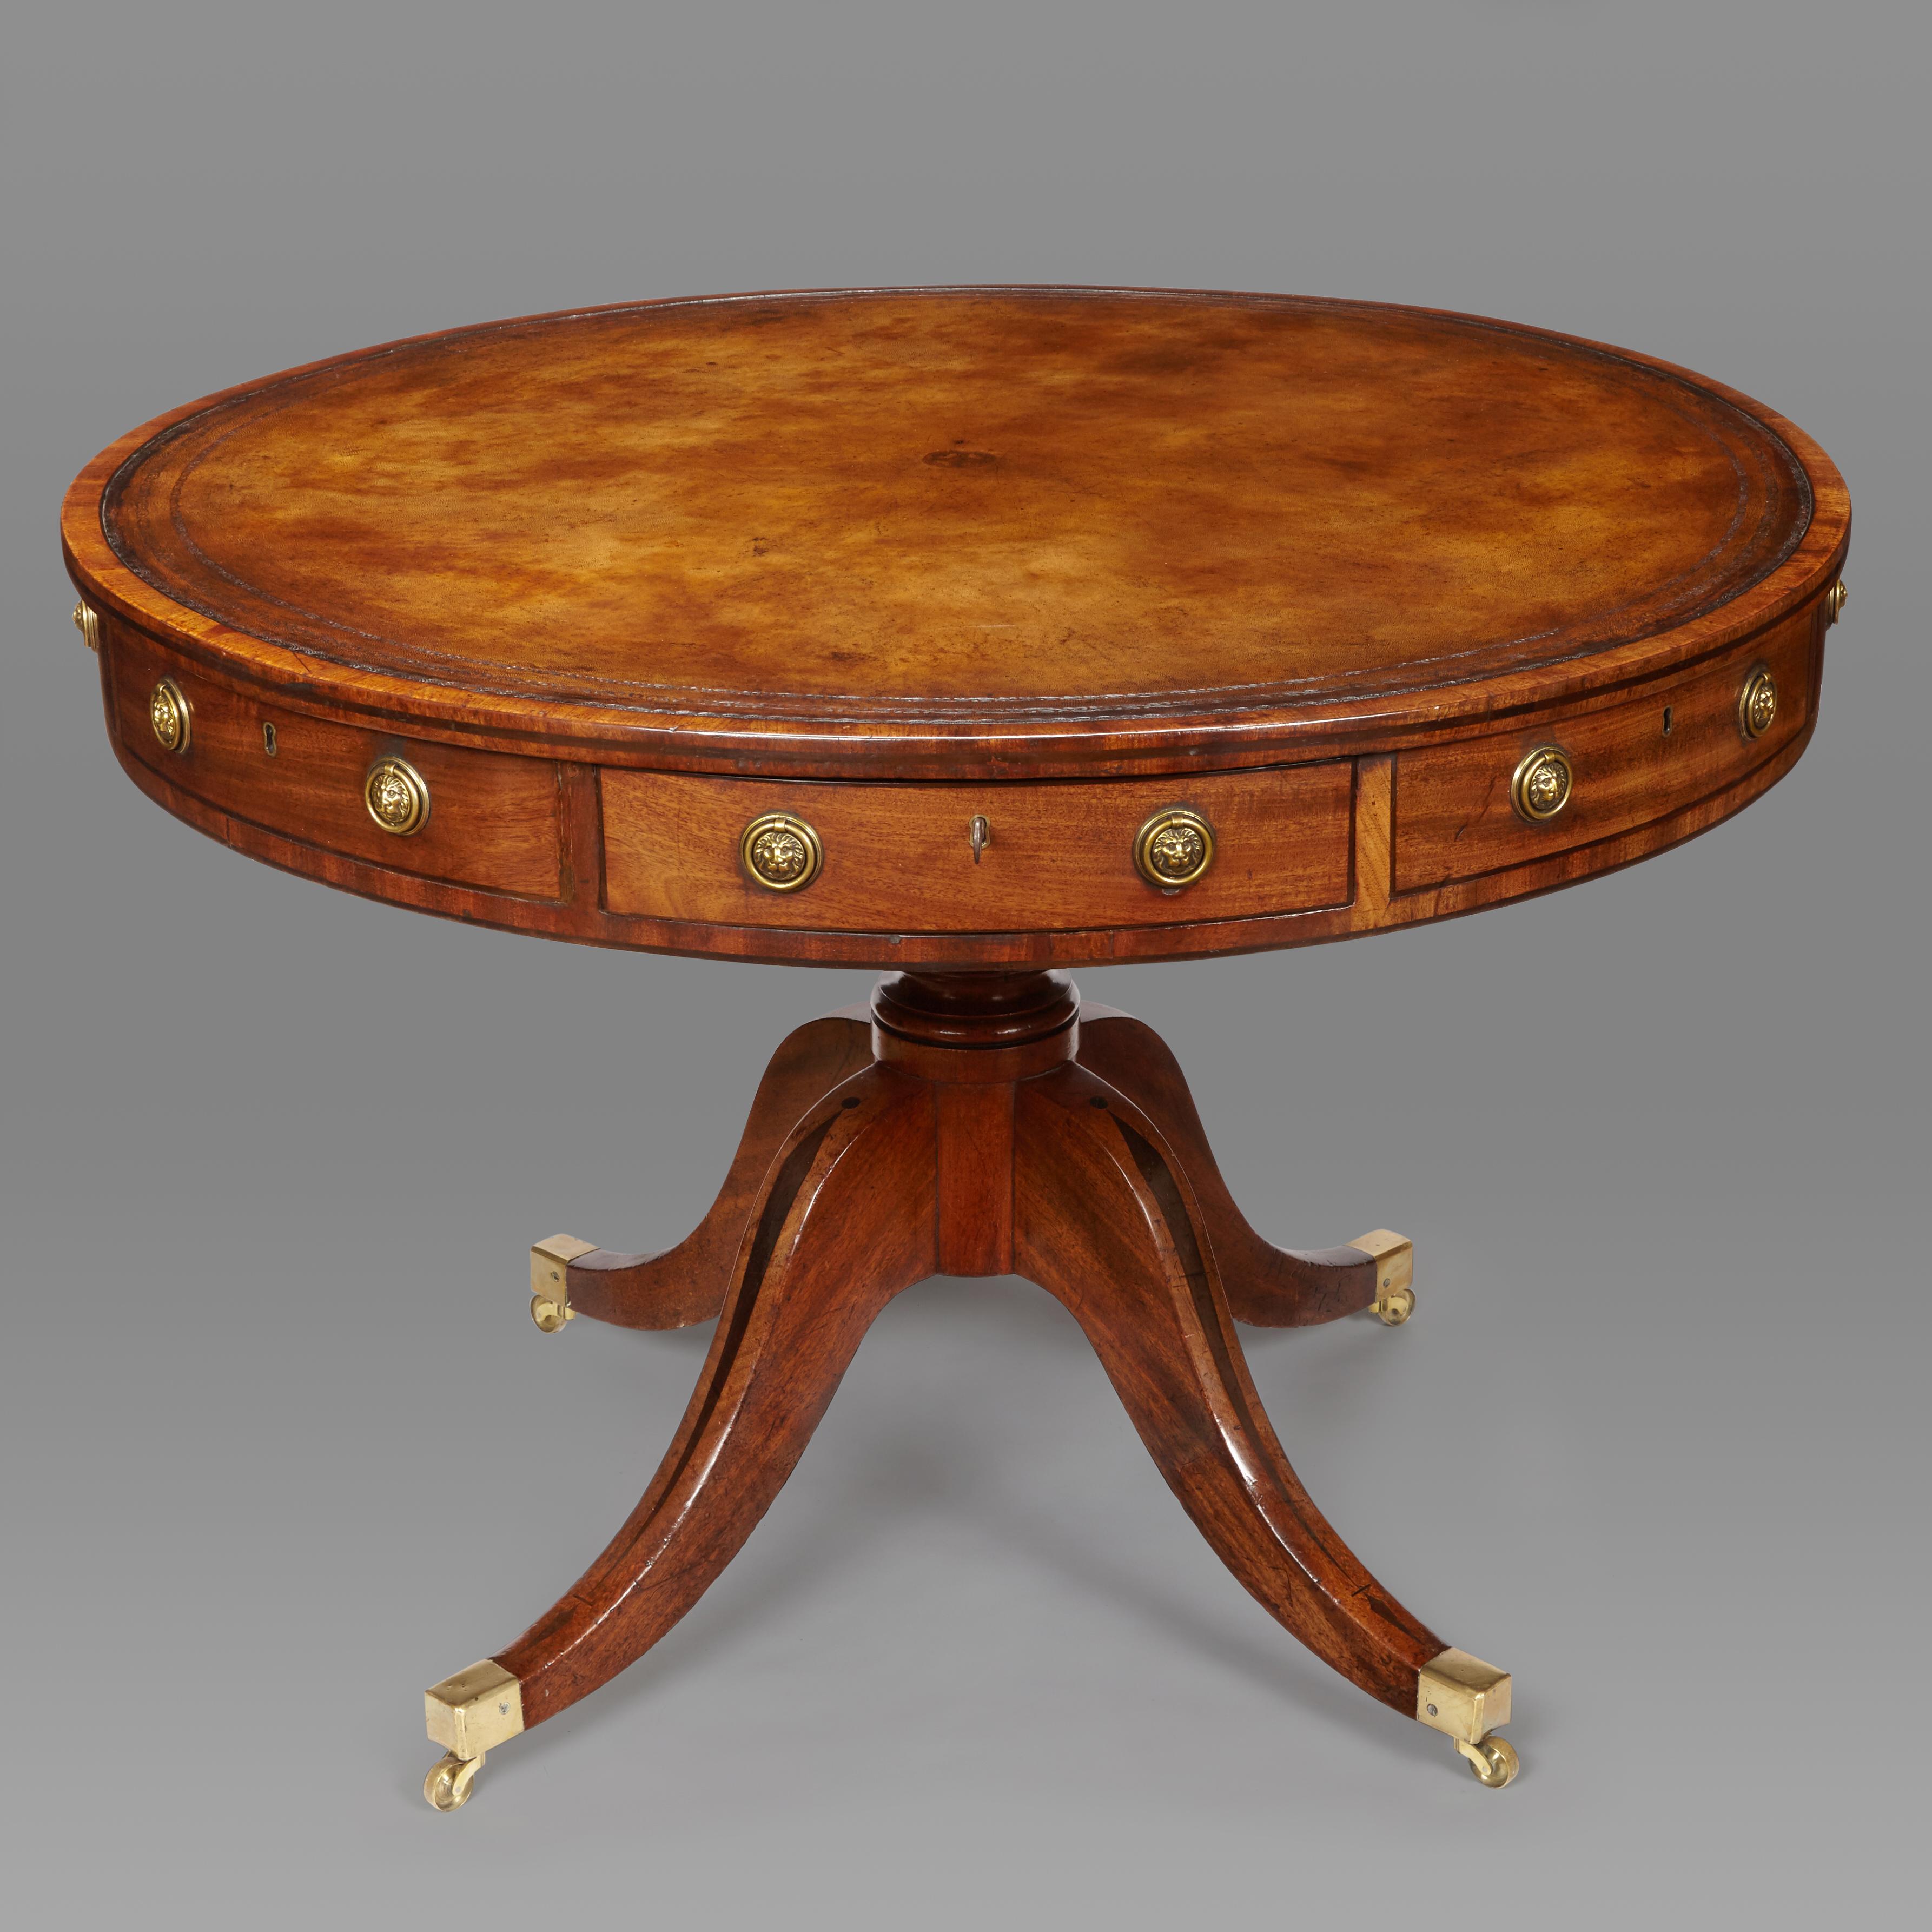 A George III mahogany and ebony inlaid drum table of pleasing proportions. The tan leather inlaid top enclosed by a slim cross- banded edge with ebony line inlay above four oak- lined drawers and four faux drawers fitted with ring handles (old